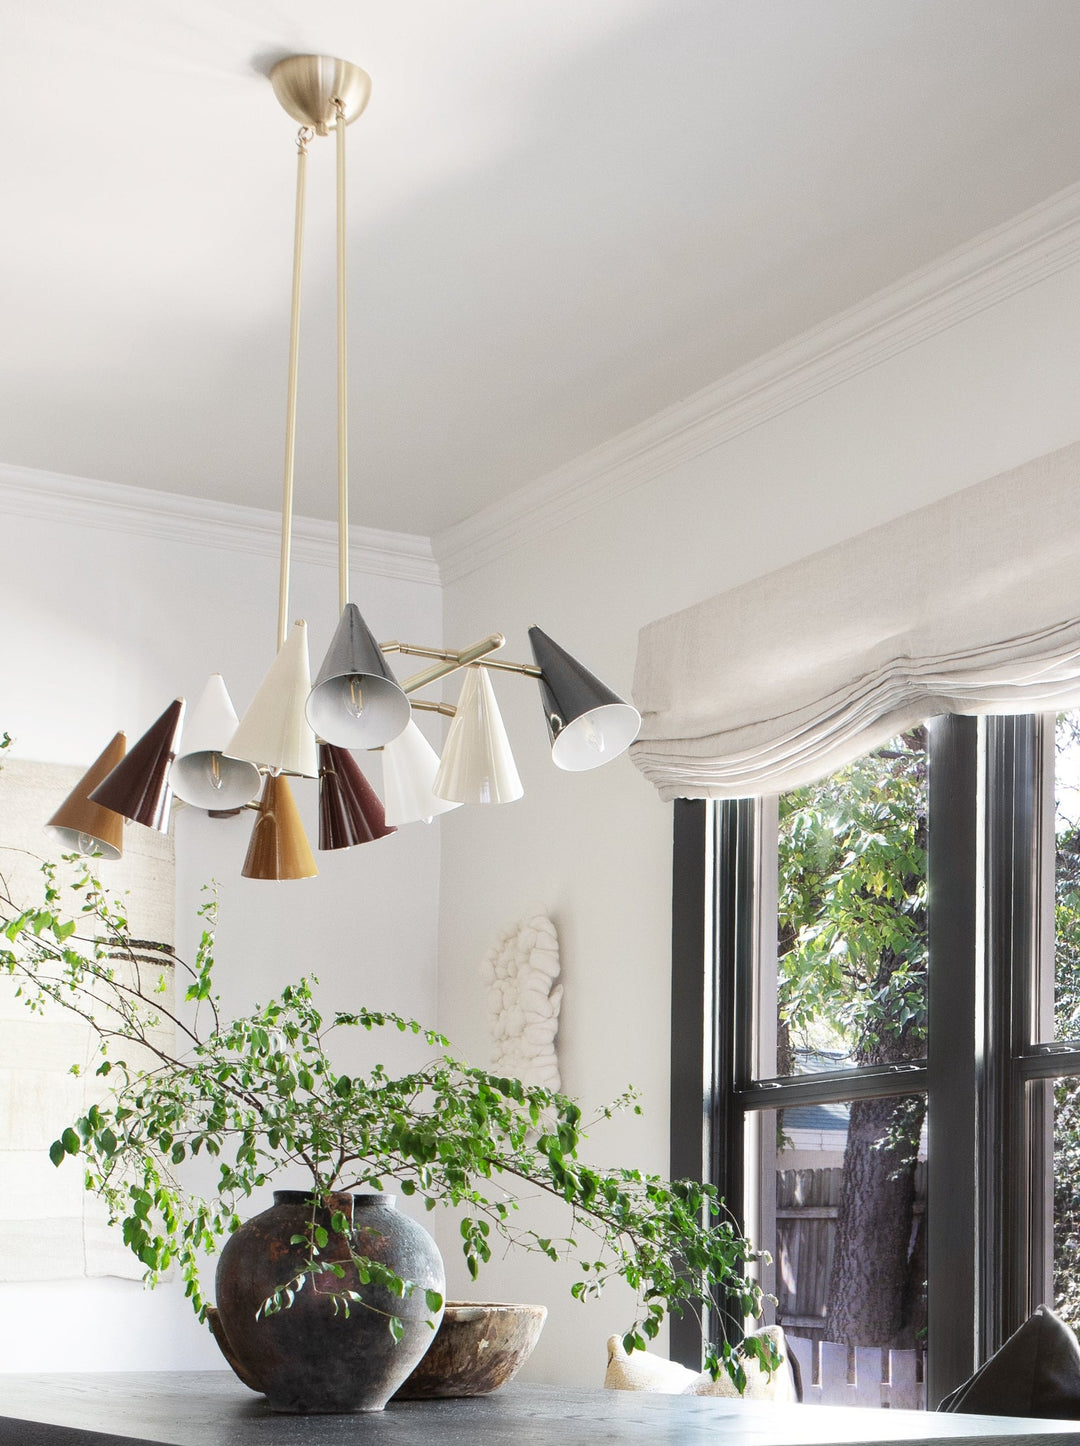 Flotilla (Ginger, Vampire, Perfect White, Crema, Charcoal, Brushed Brass) — Interior by Urbanology Designs